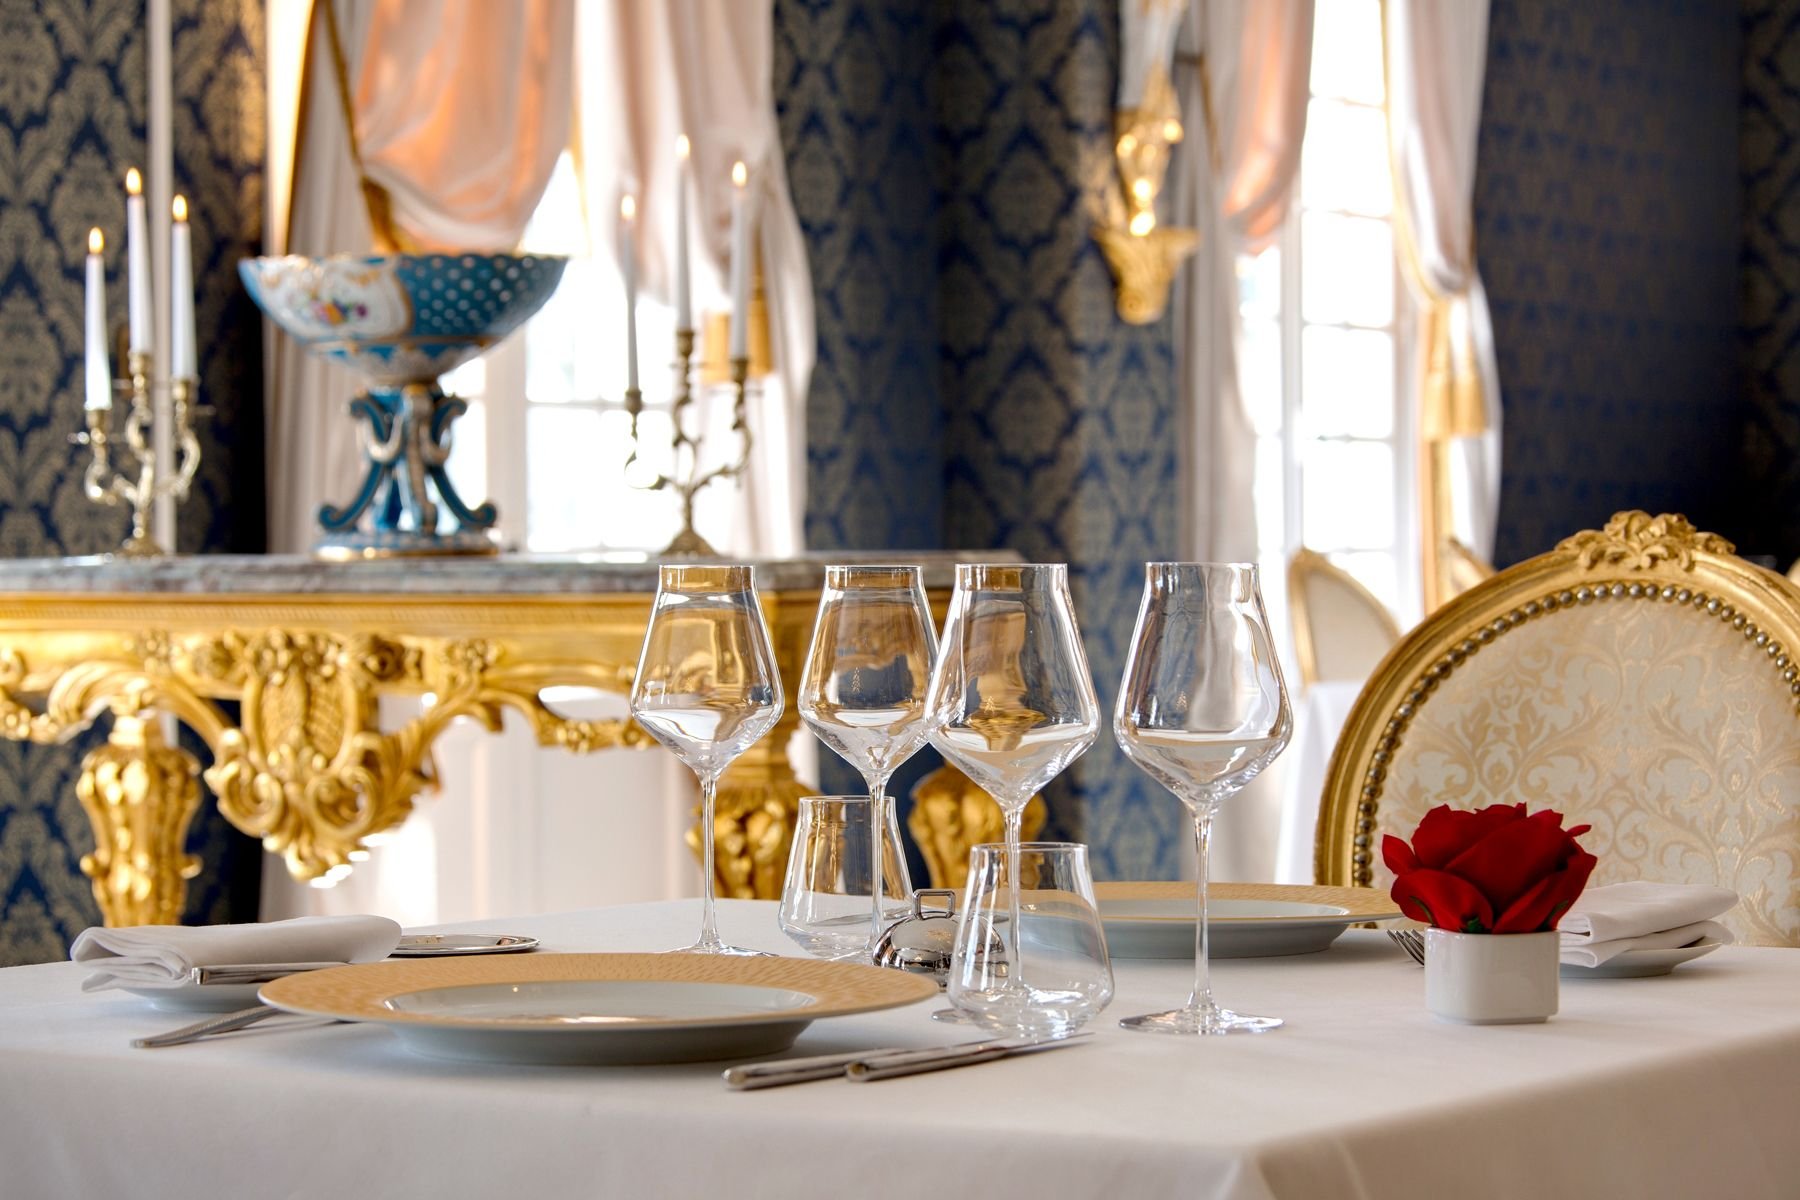 Gourmet stay in a castle | Château de Beauvois |  20 MIN of TOURS | 1 night - dinner - breakfast for 2 peoples